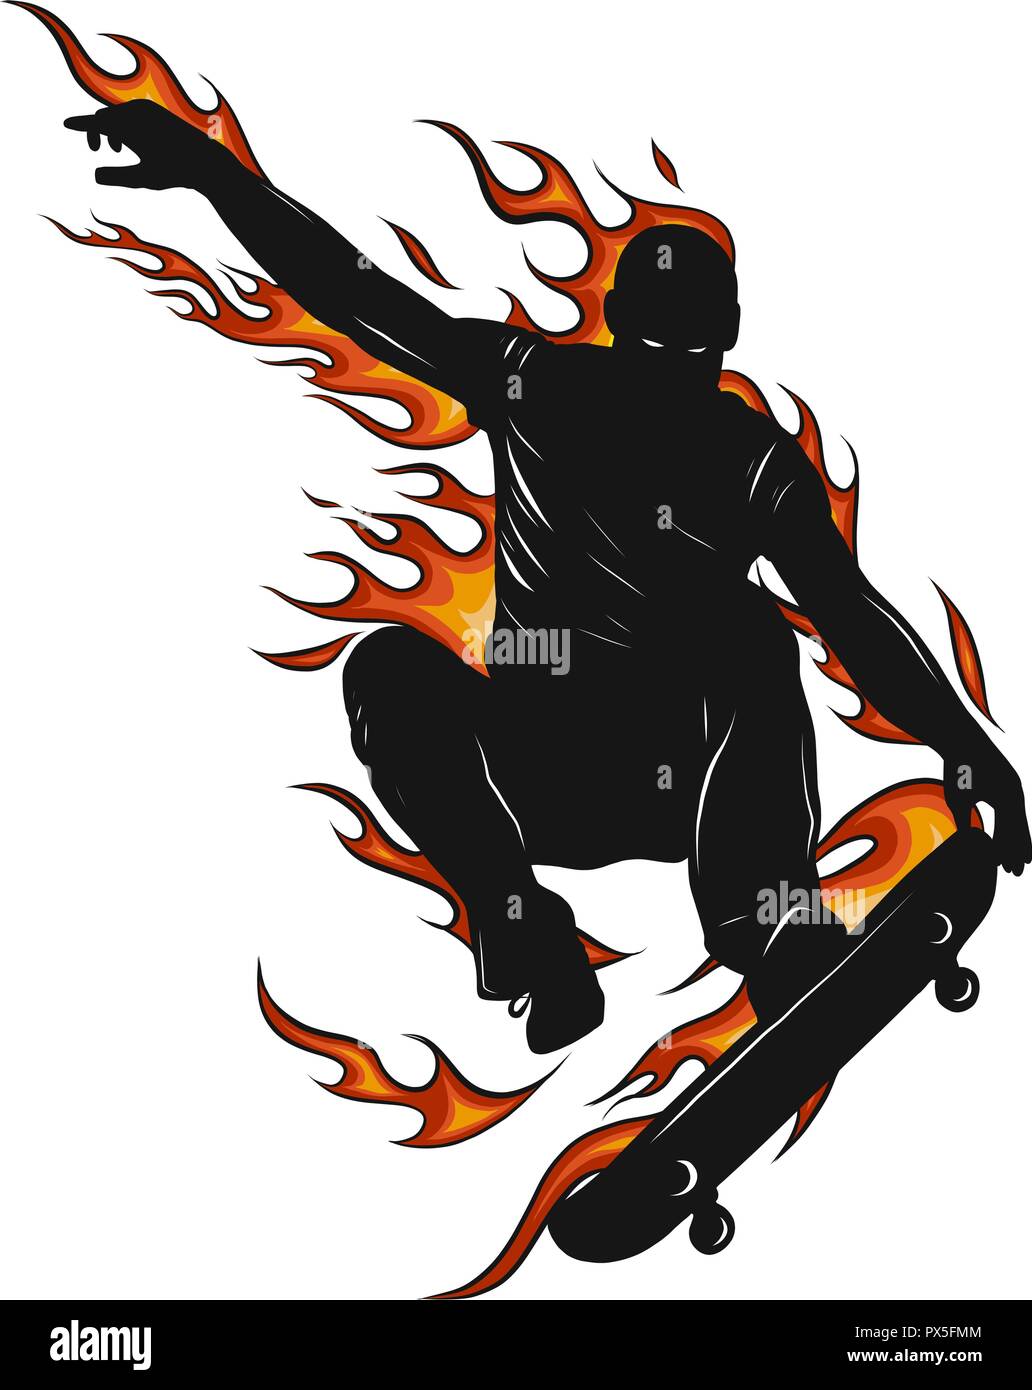 Skateboarder doing a jumping trick, low poly vector illustration. with stain. Stock Vector